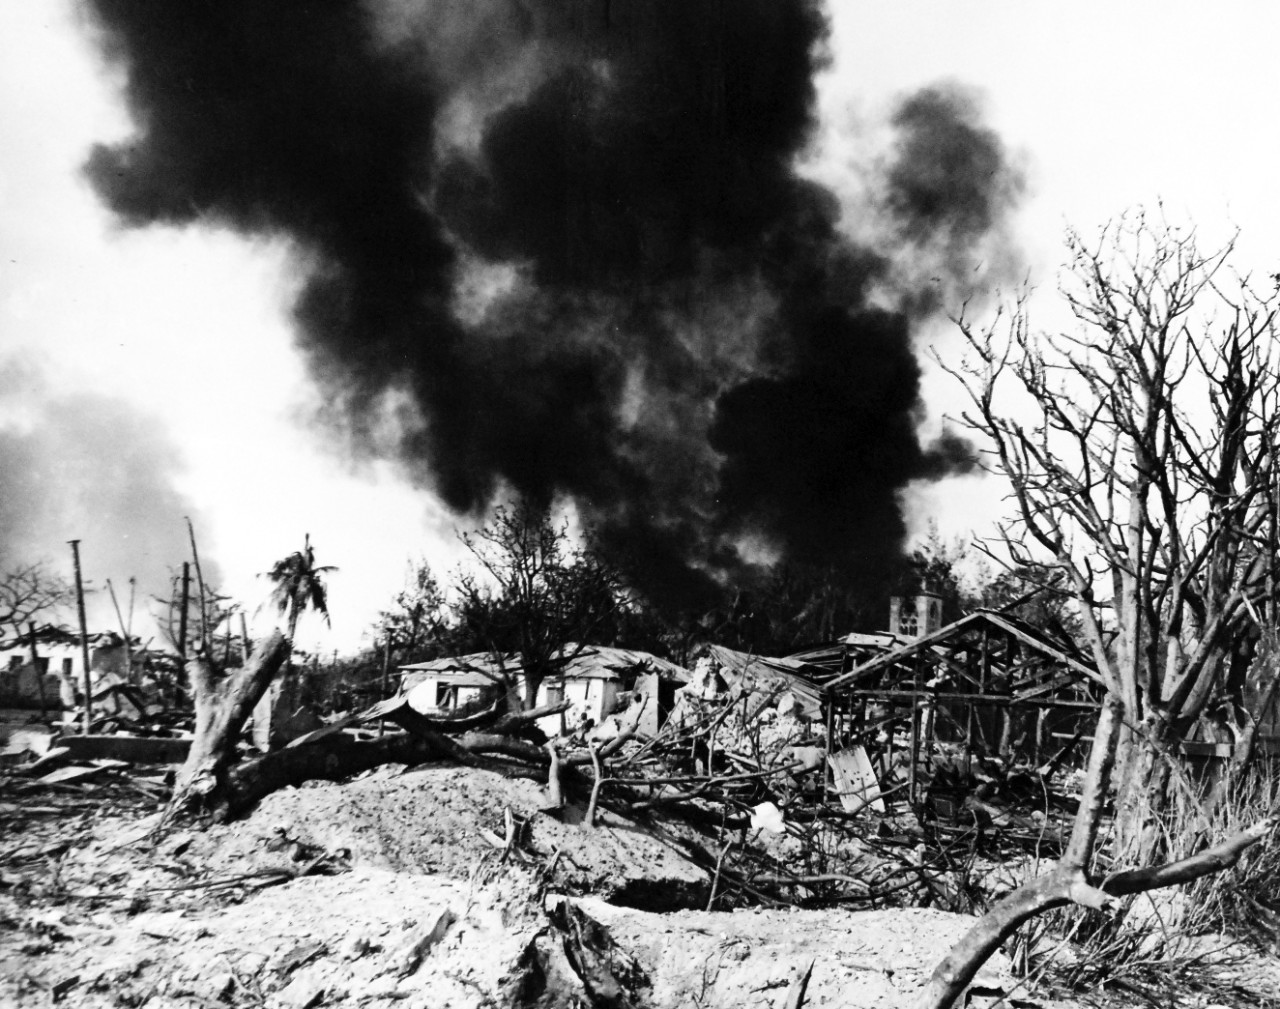 80-G-287181:   Invasion of Saipan, June-July 1944.    General destruction ahead of Marine front lines on Saipan showing a fire and shell crater,  July 2, 1944.     Photographed by USS Indianapolis (CA-35) photographer.   Official U.S. Navy photograph, now in the collections of the National Archives.  (2017/03/21).  